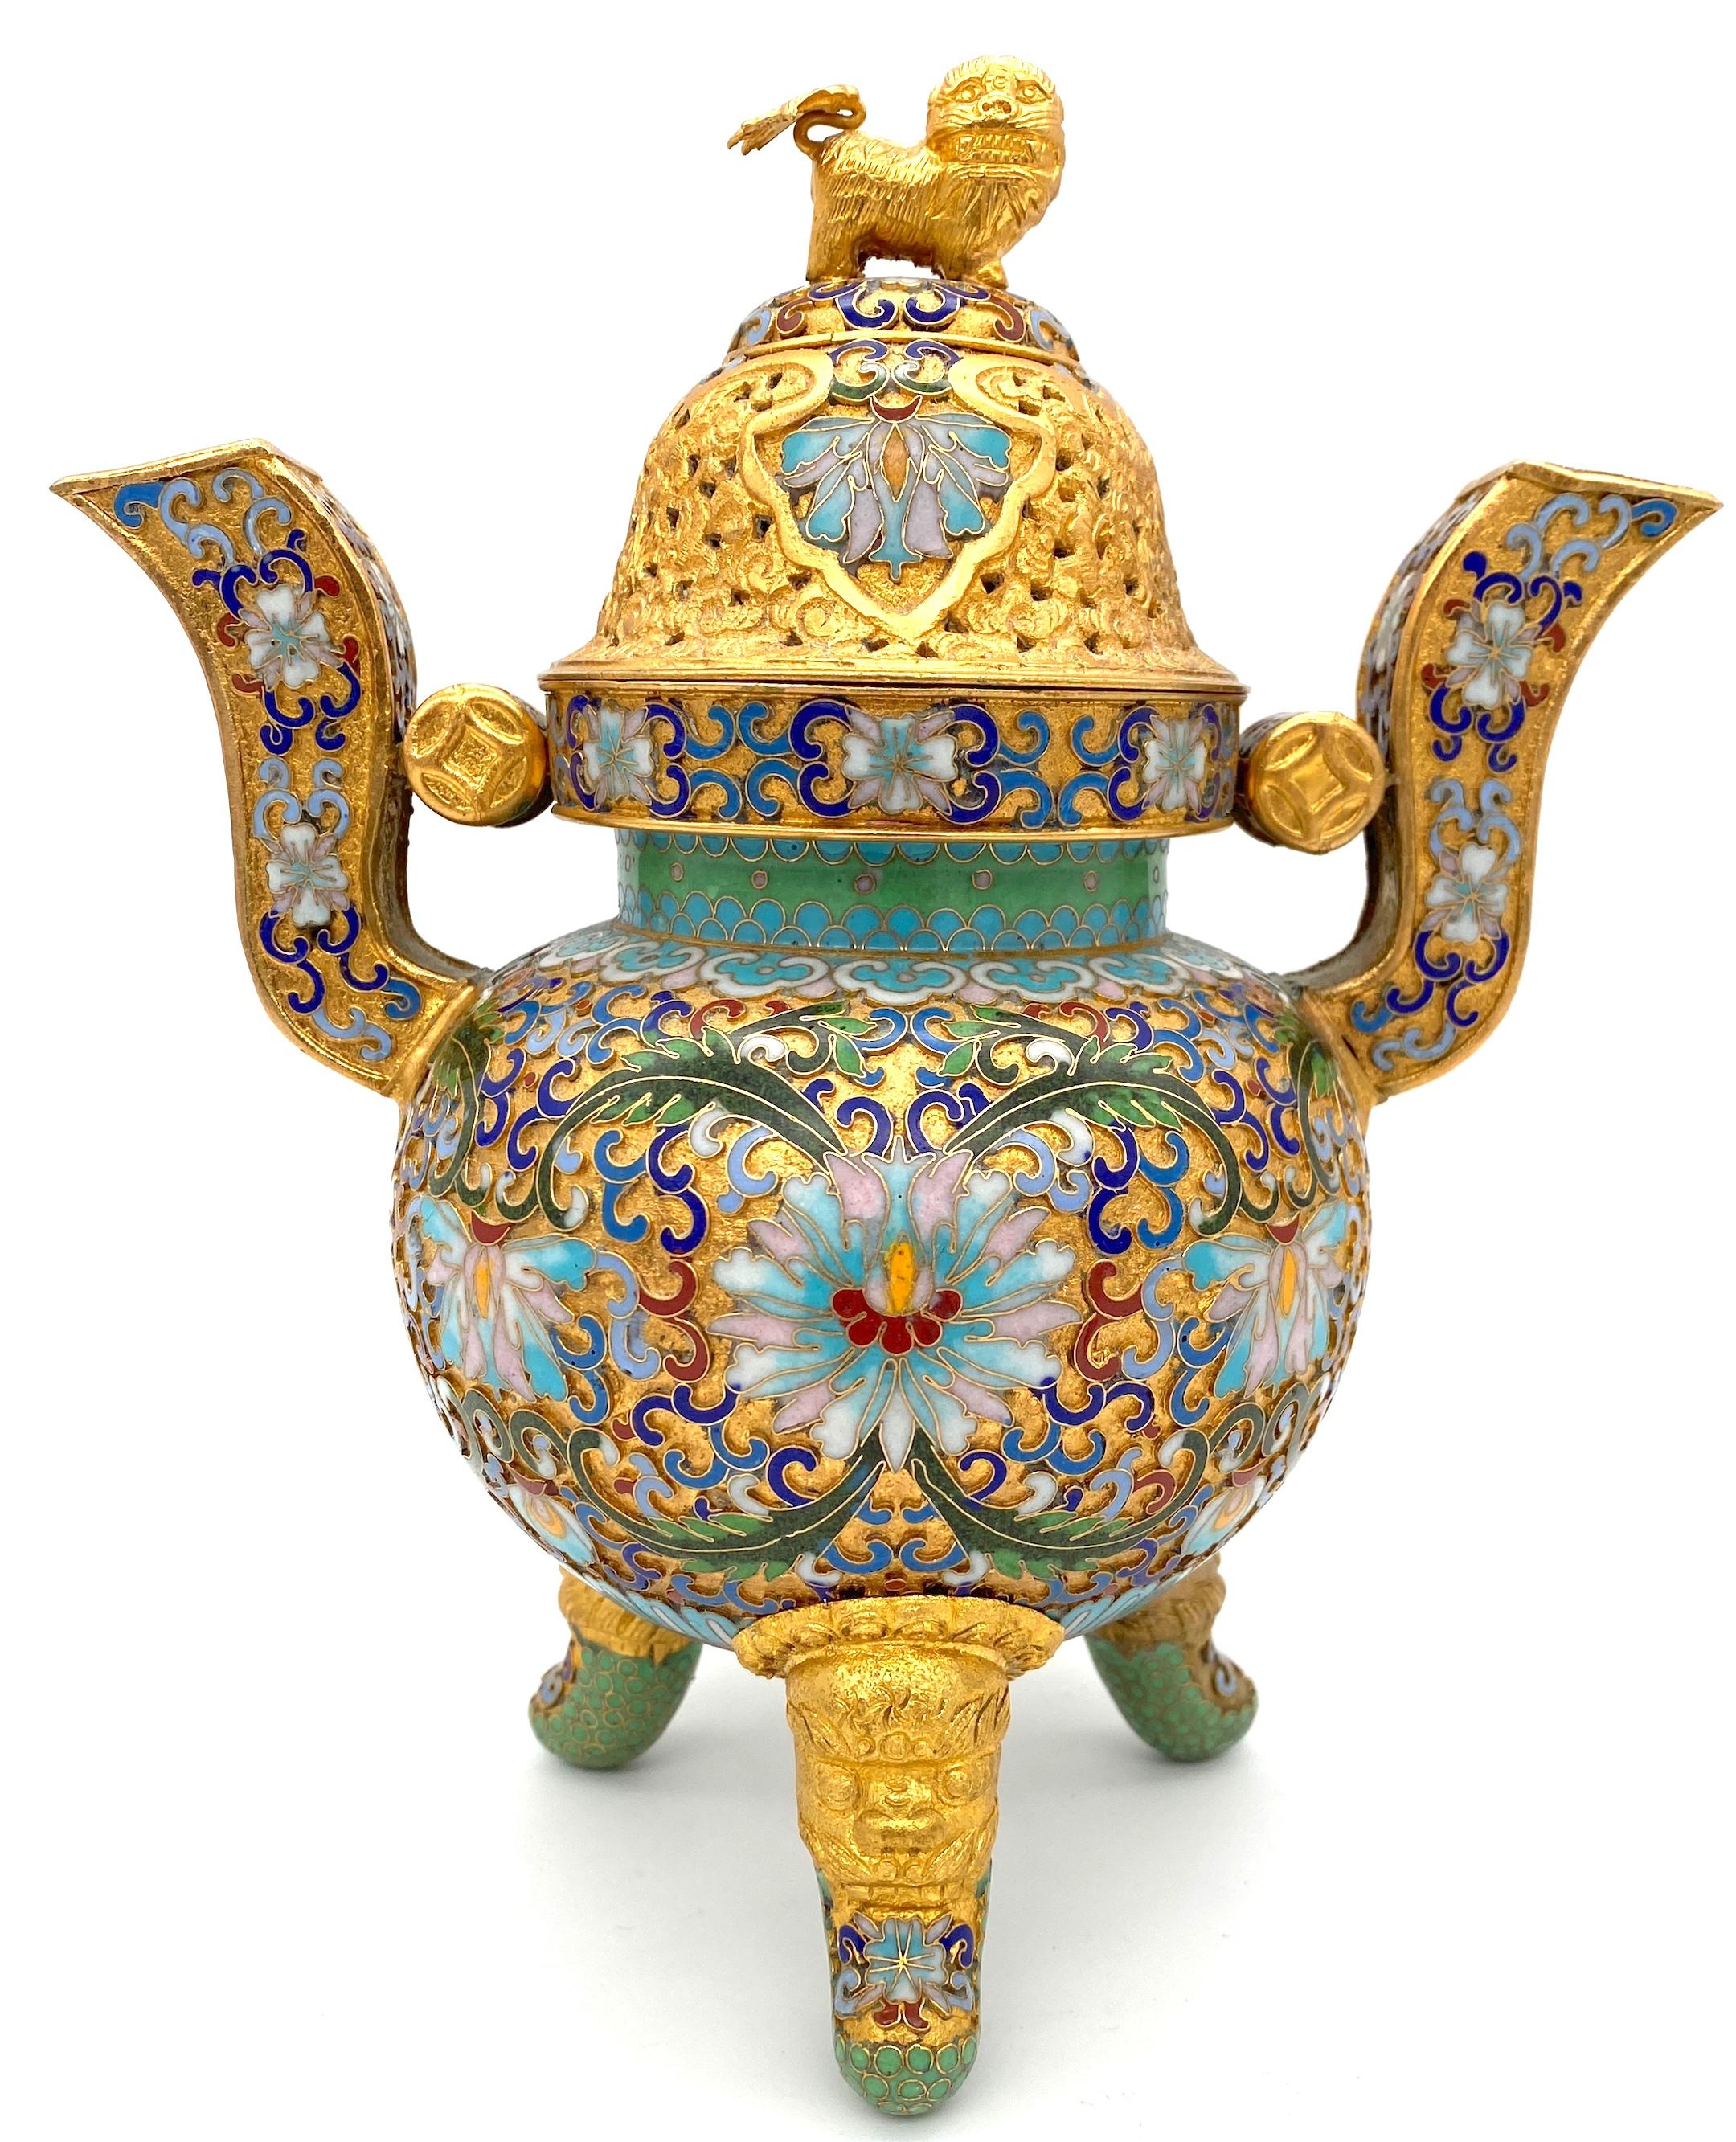 20th Century Chinese Elaborate Gilt Cloisonné Foo Dog Censor 

A stunning 20th Century Chinese Elaborate Gilt Cloisonné Foo Dog Censor, a masterwork of later craftsmanship. This exquisite piece is all-over gilt chased metalwork, featuring raised